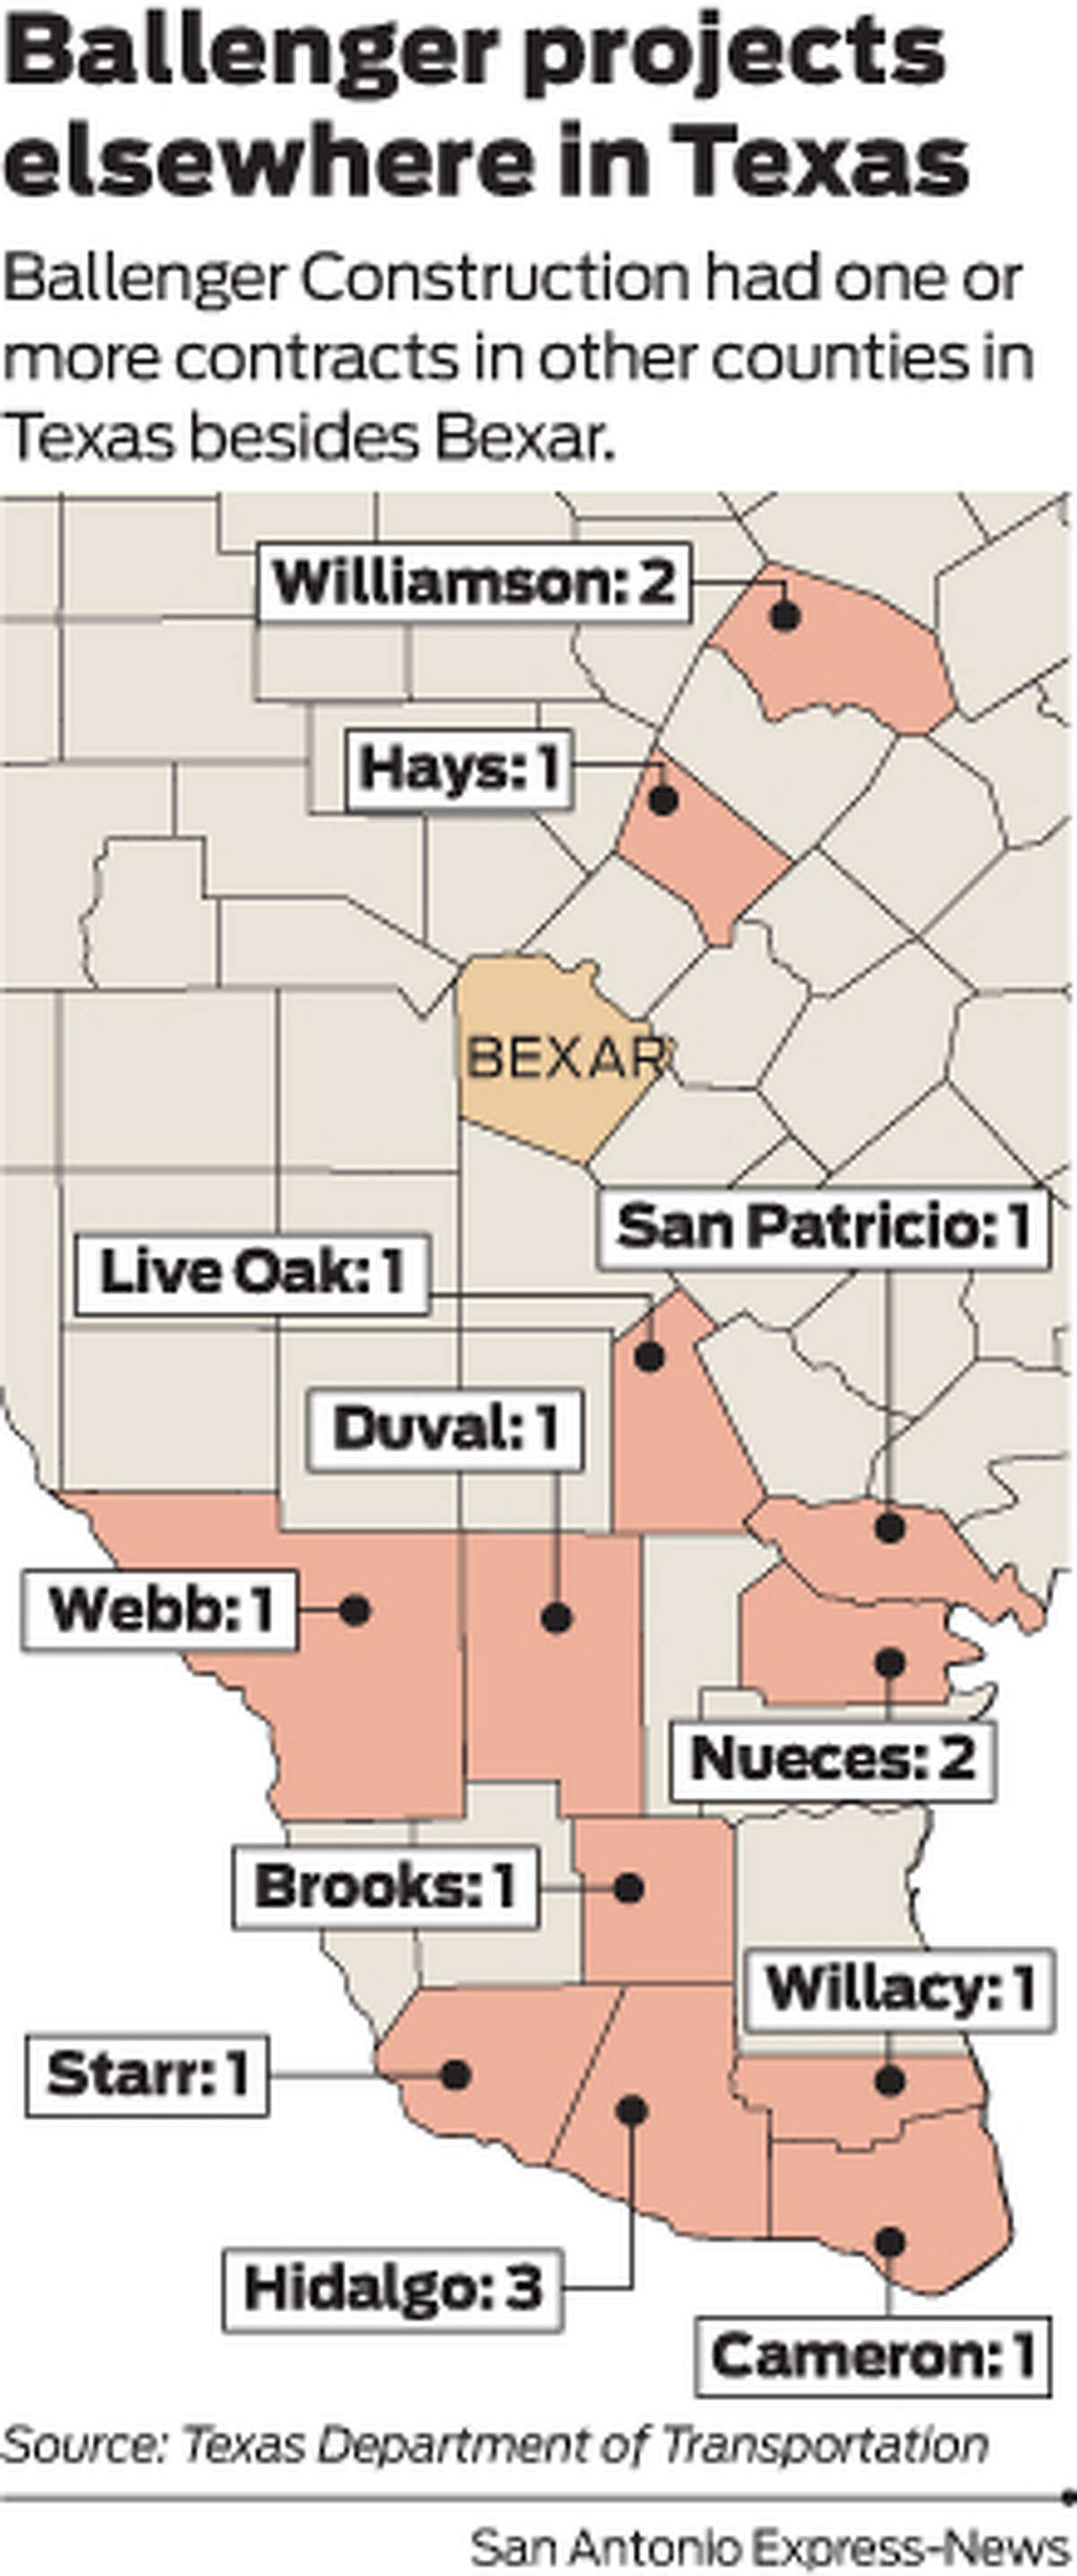 Ballenger Construction had one or more contracts in other counties in Texas besides Bexar.